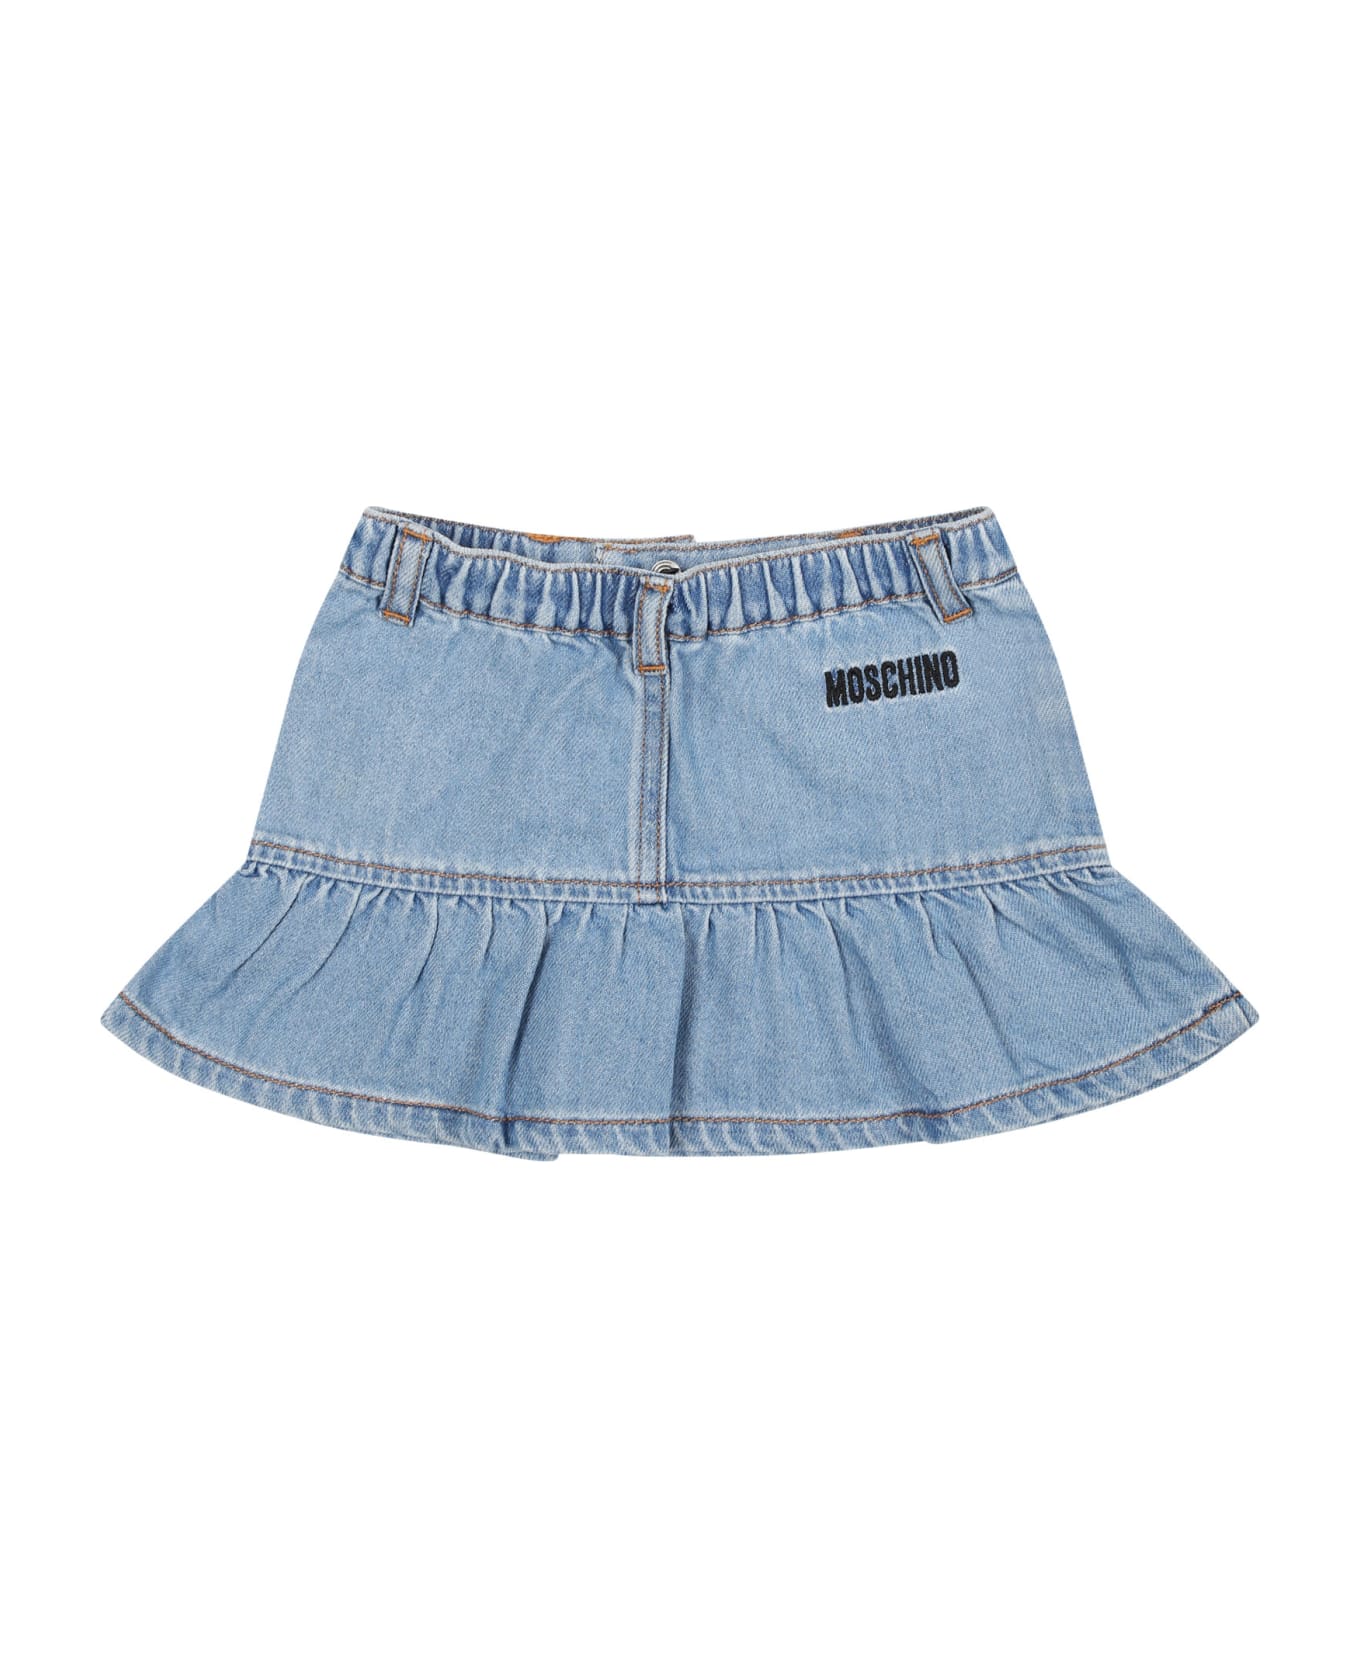 Moschino Casual Denim Skirt For Baby Girl With Teddy Bear - BLUE ボトムス